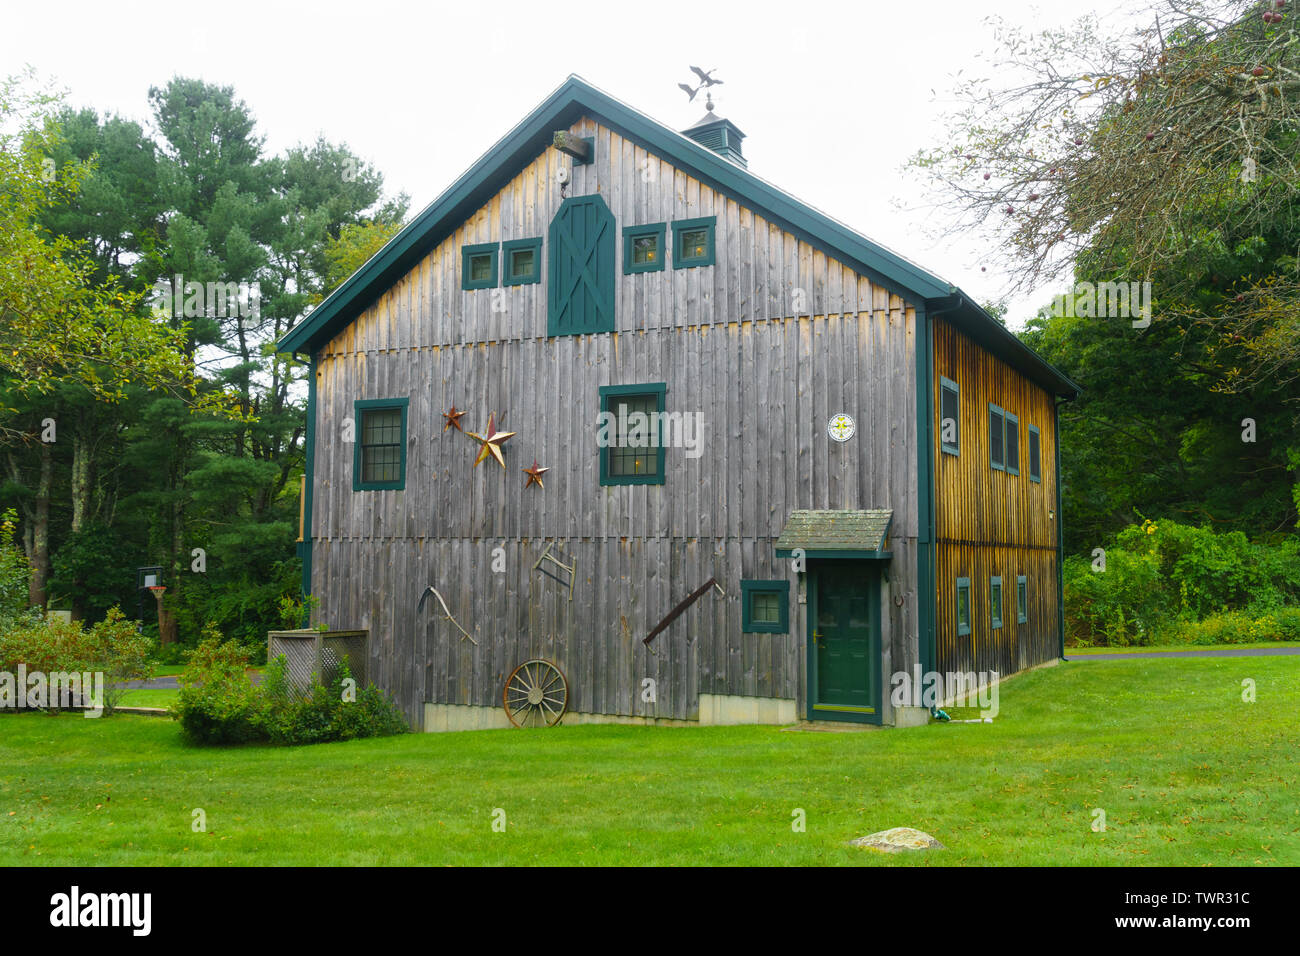 Picturesque wooden barn house, Biddeford, Maine, USA. Stock Photo